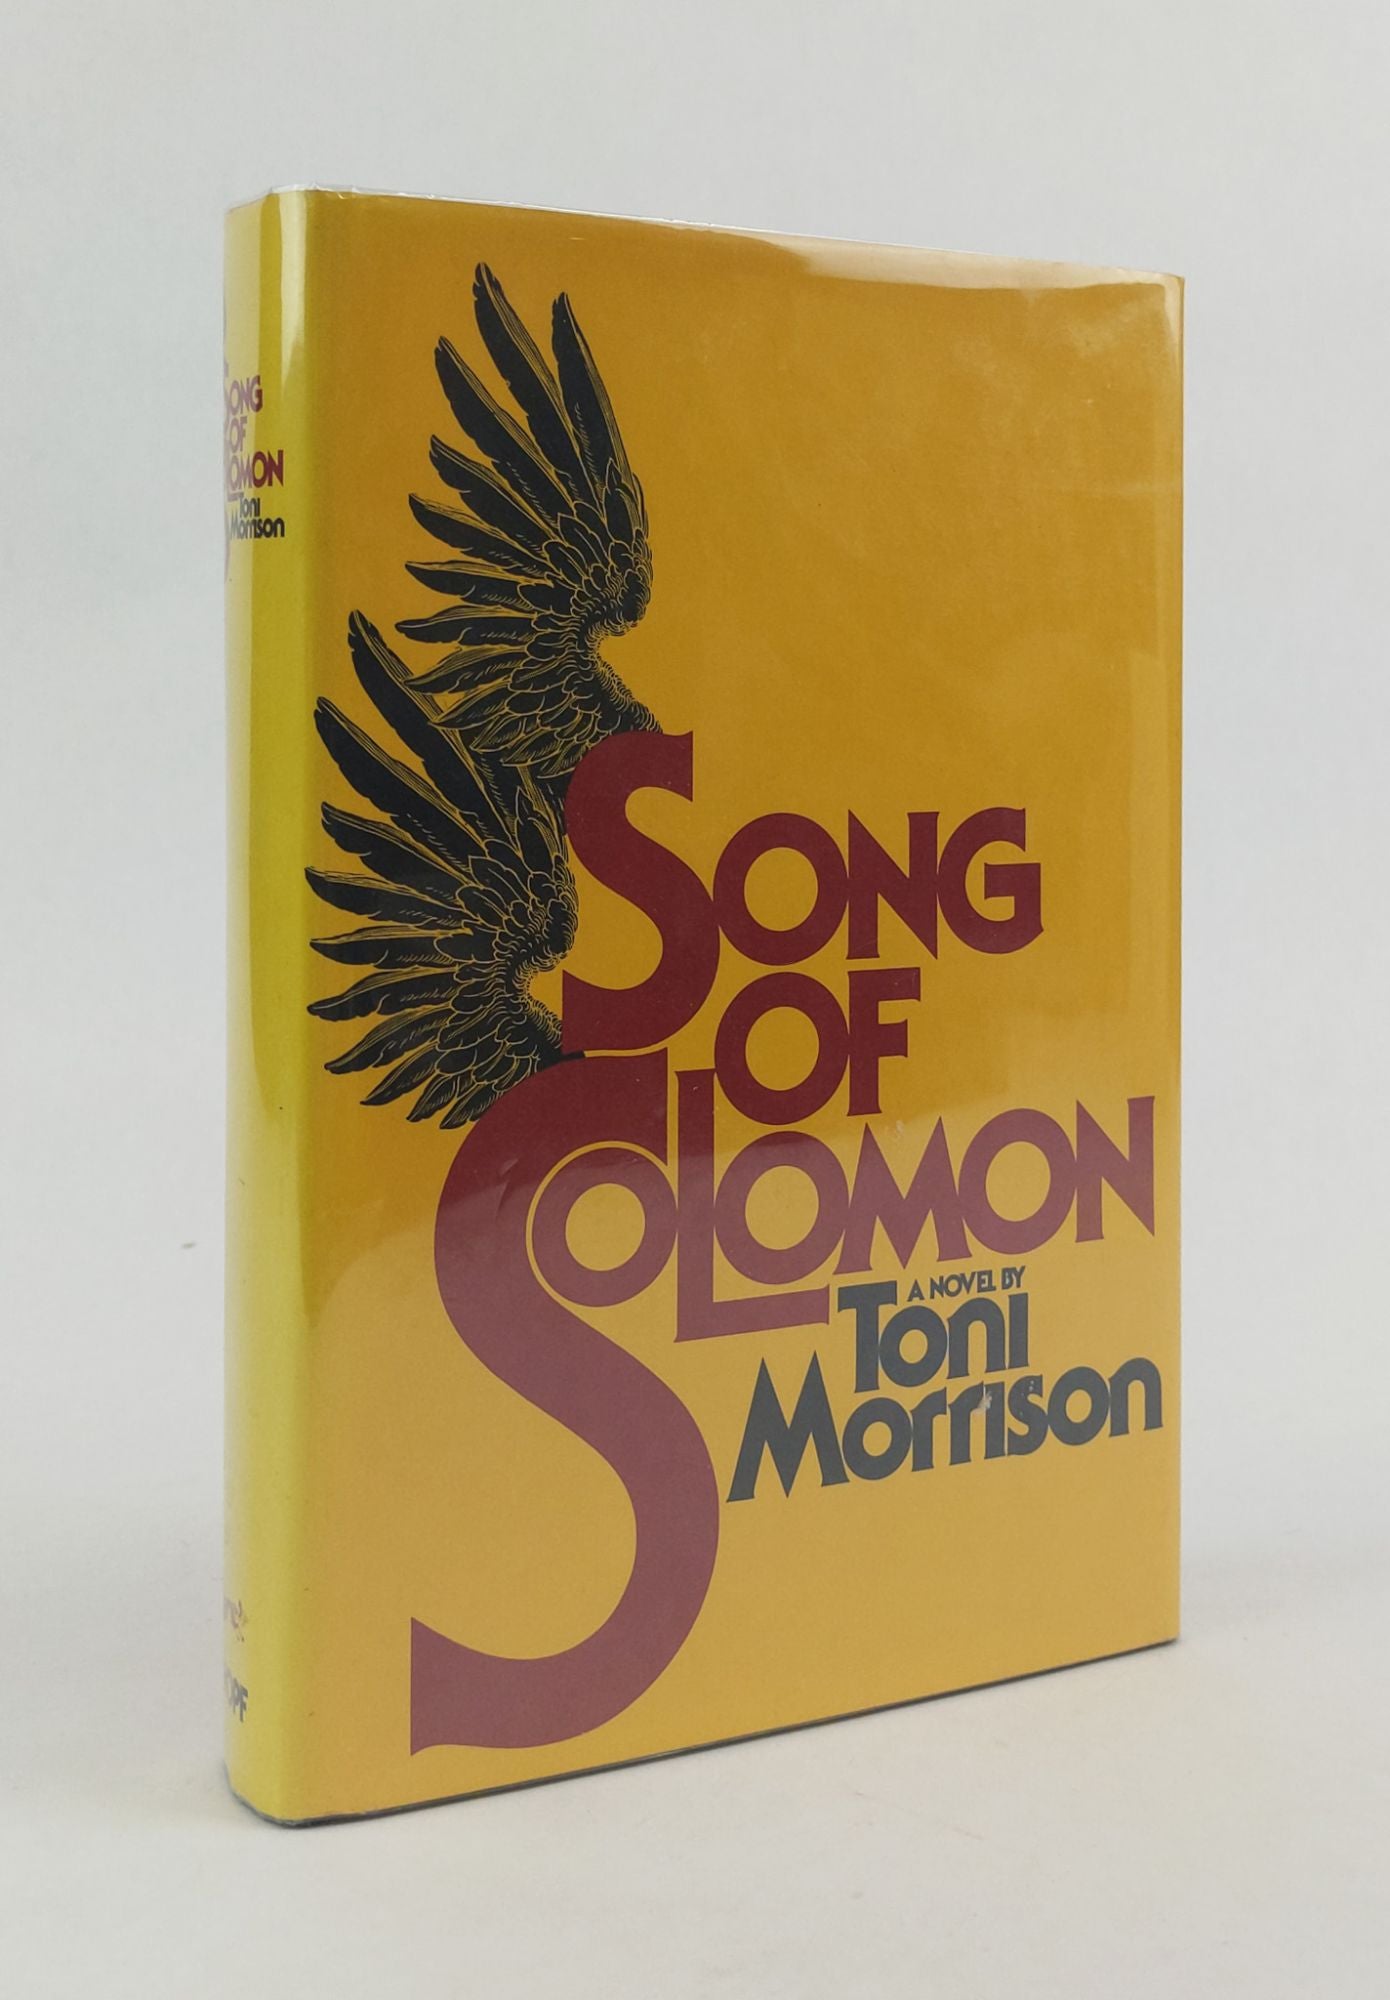 Product Image for SONG OF SOLOMON [Inscribed]